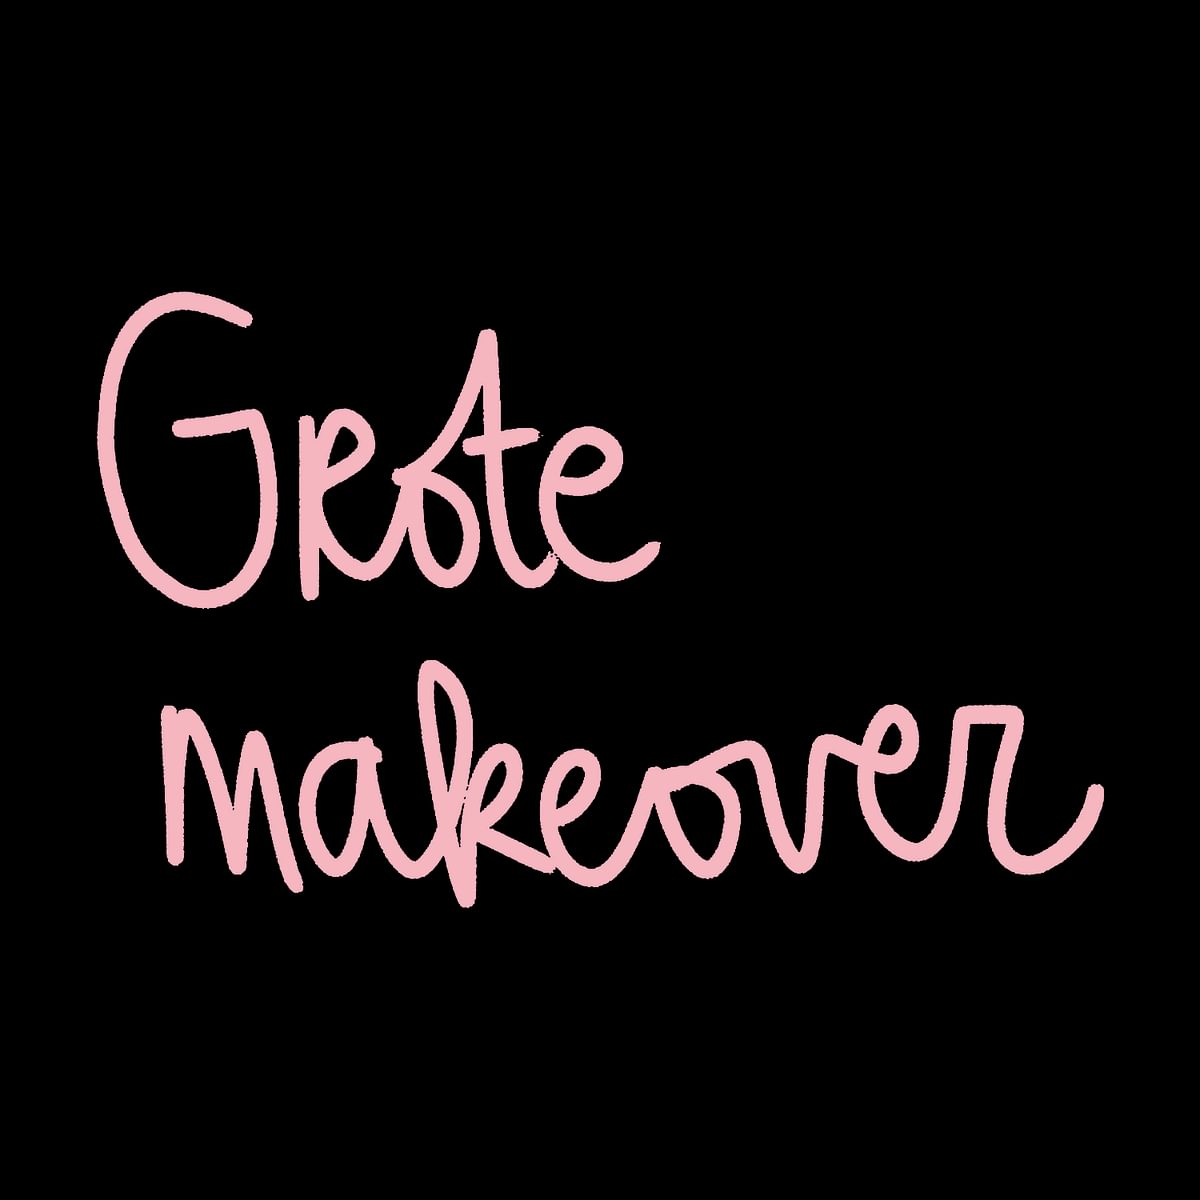 Grote makeover